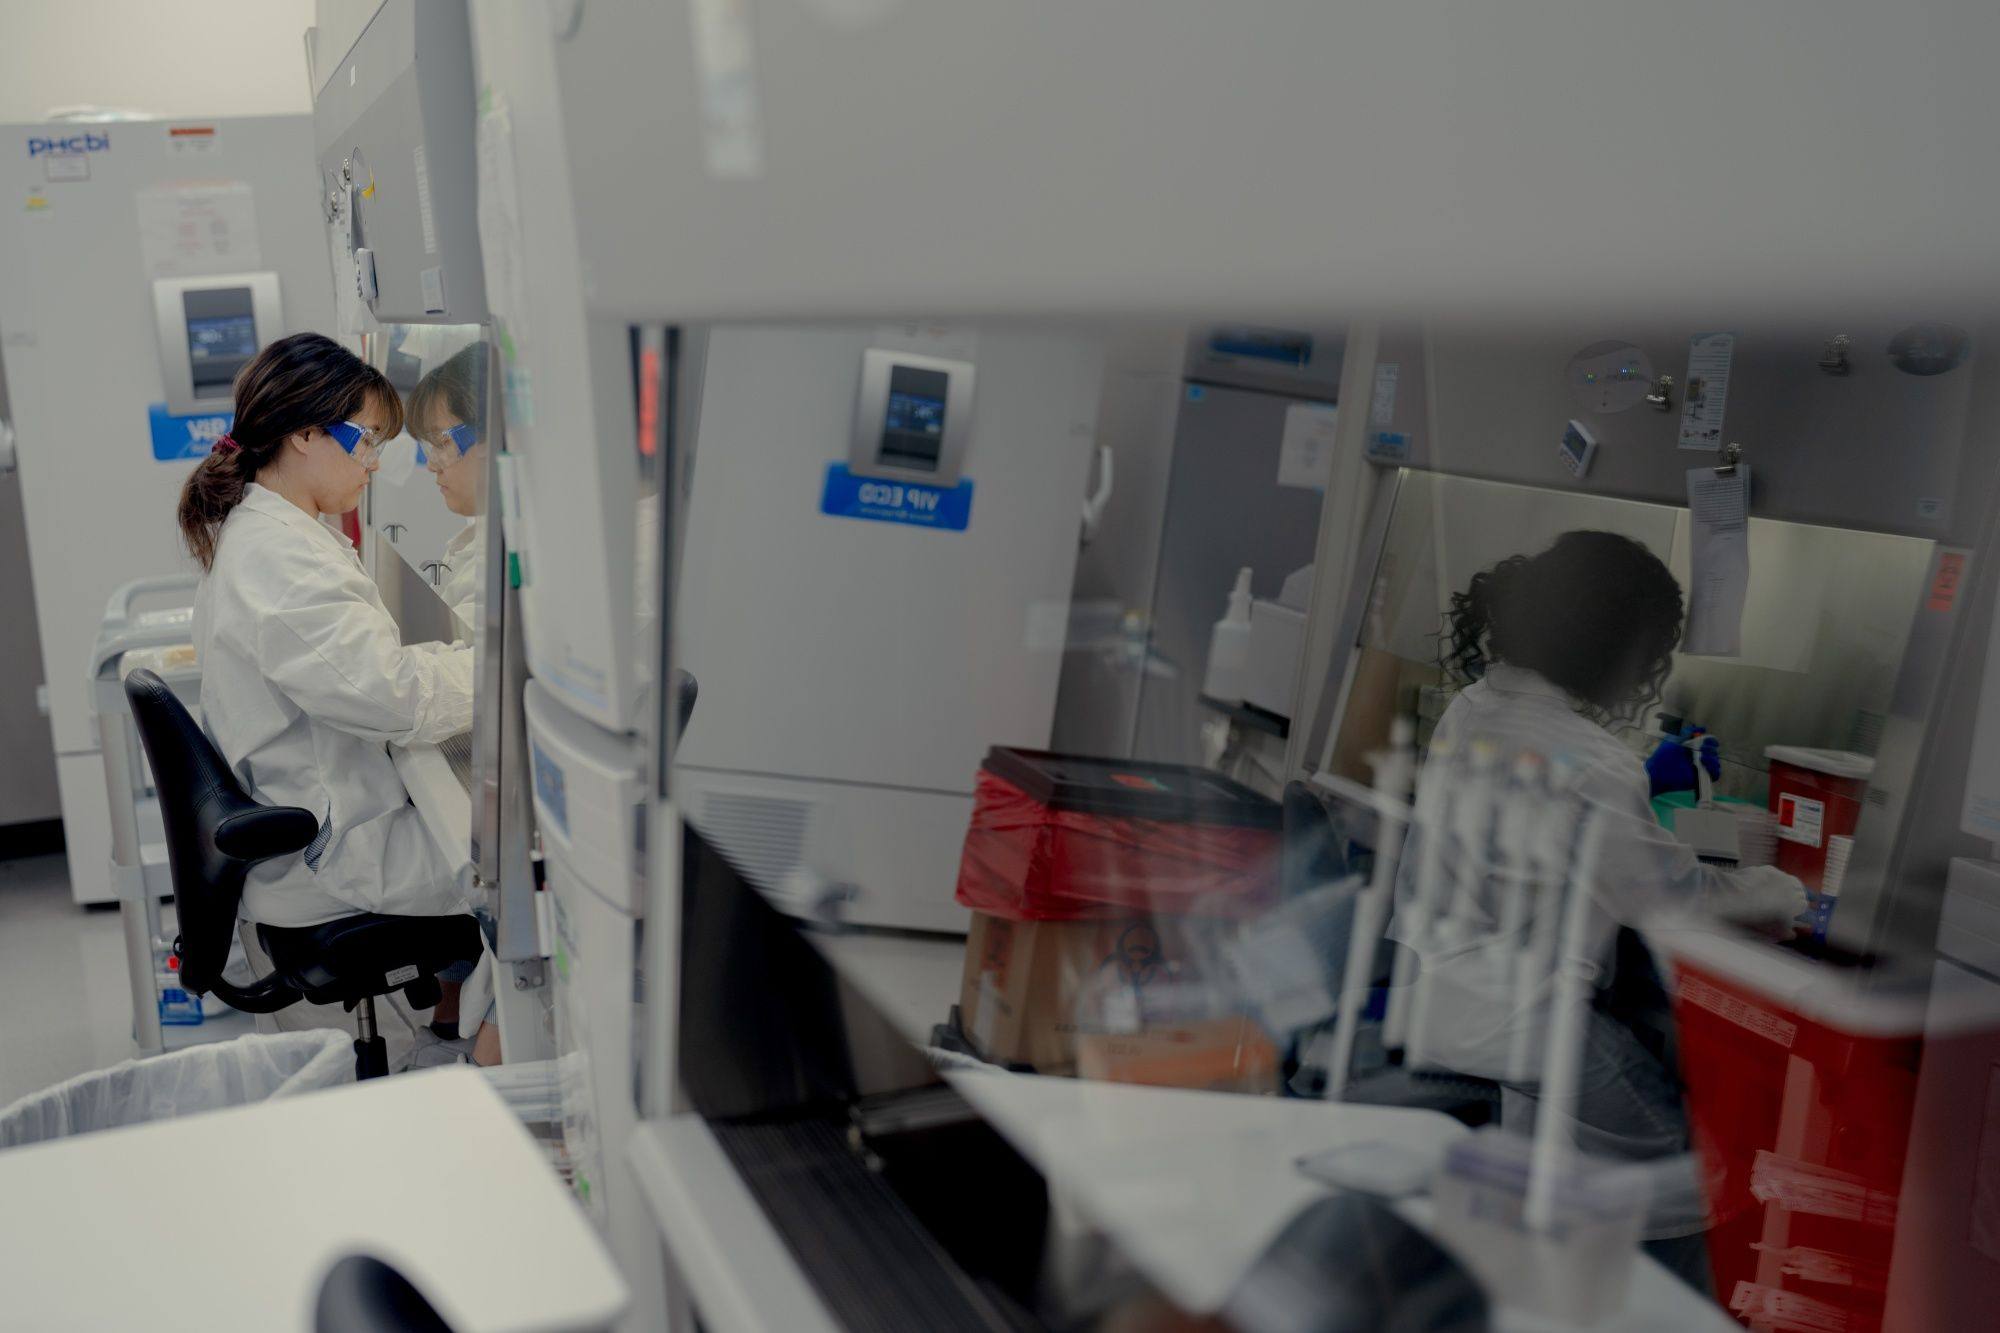 Scientists work at the Pfizer vaccine research and development facility in New York on June 16. Photo: Bloomberg